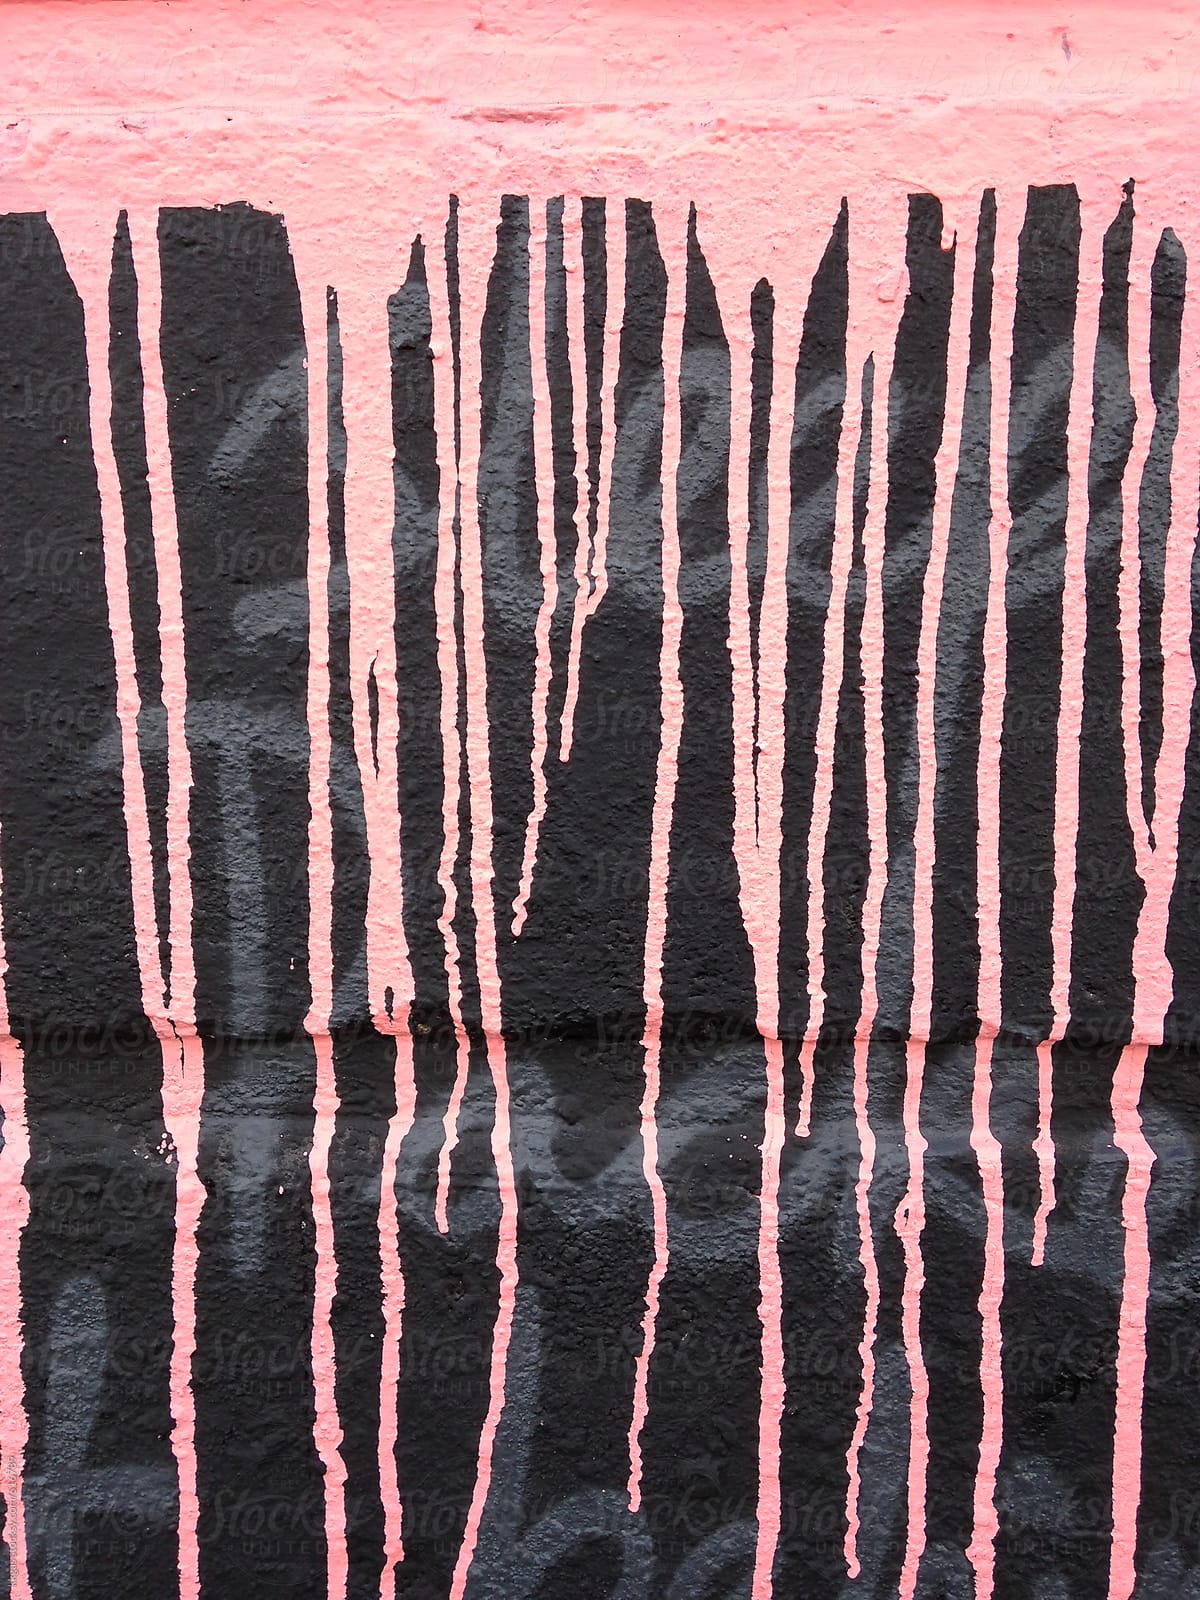 Pink paint splashes running over hand writing on a black wall